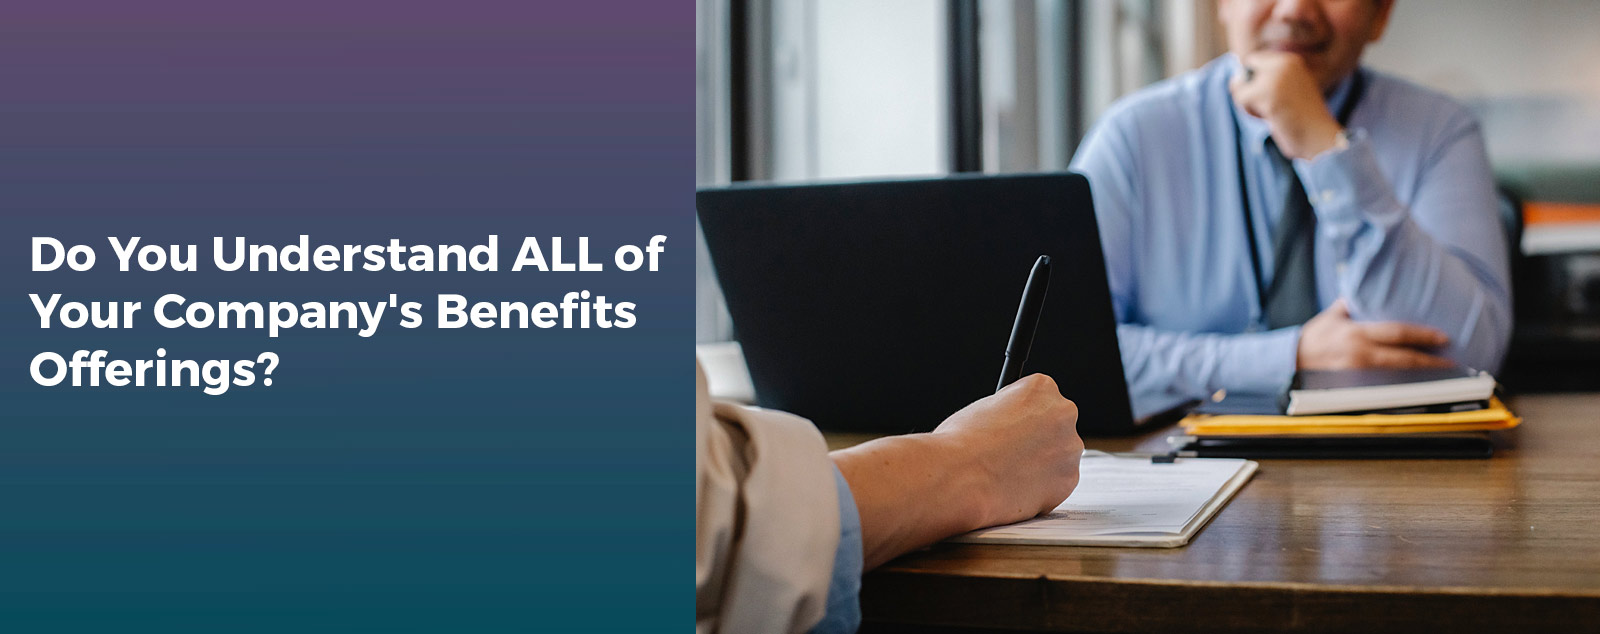 Do You Understand ALL of Your Company’s Benefits Offerings?